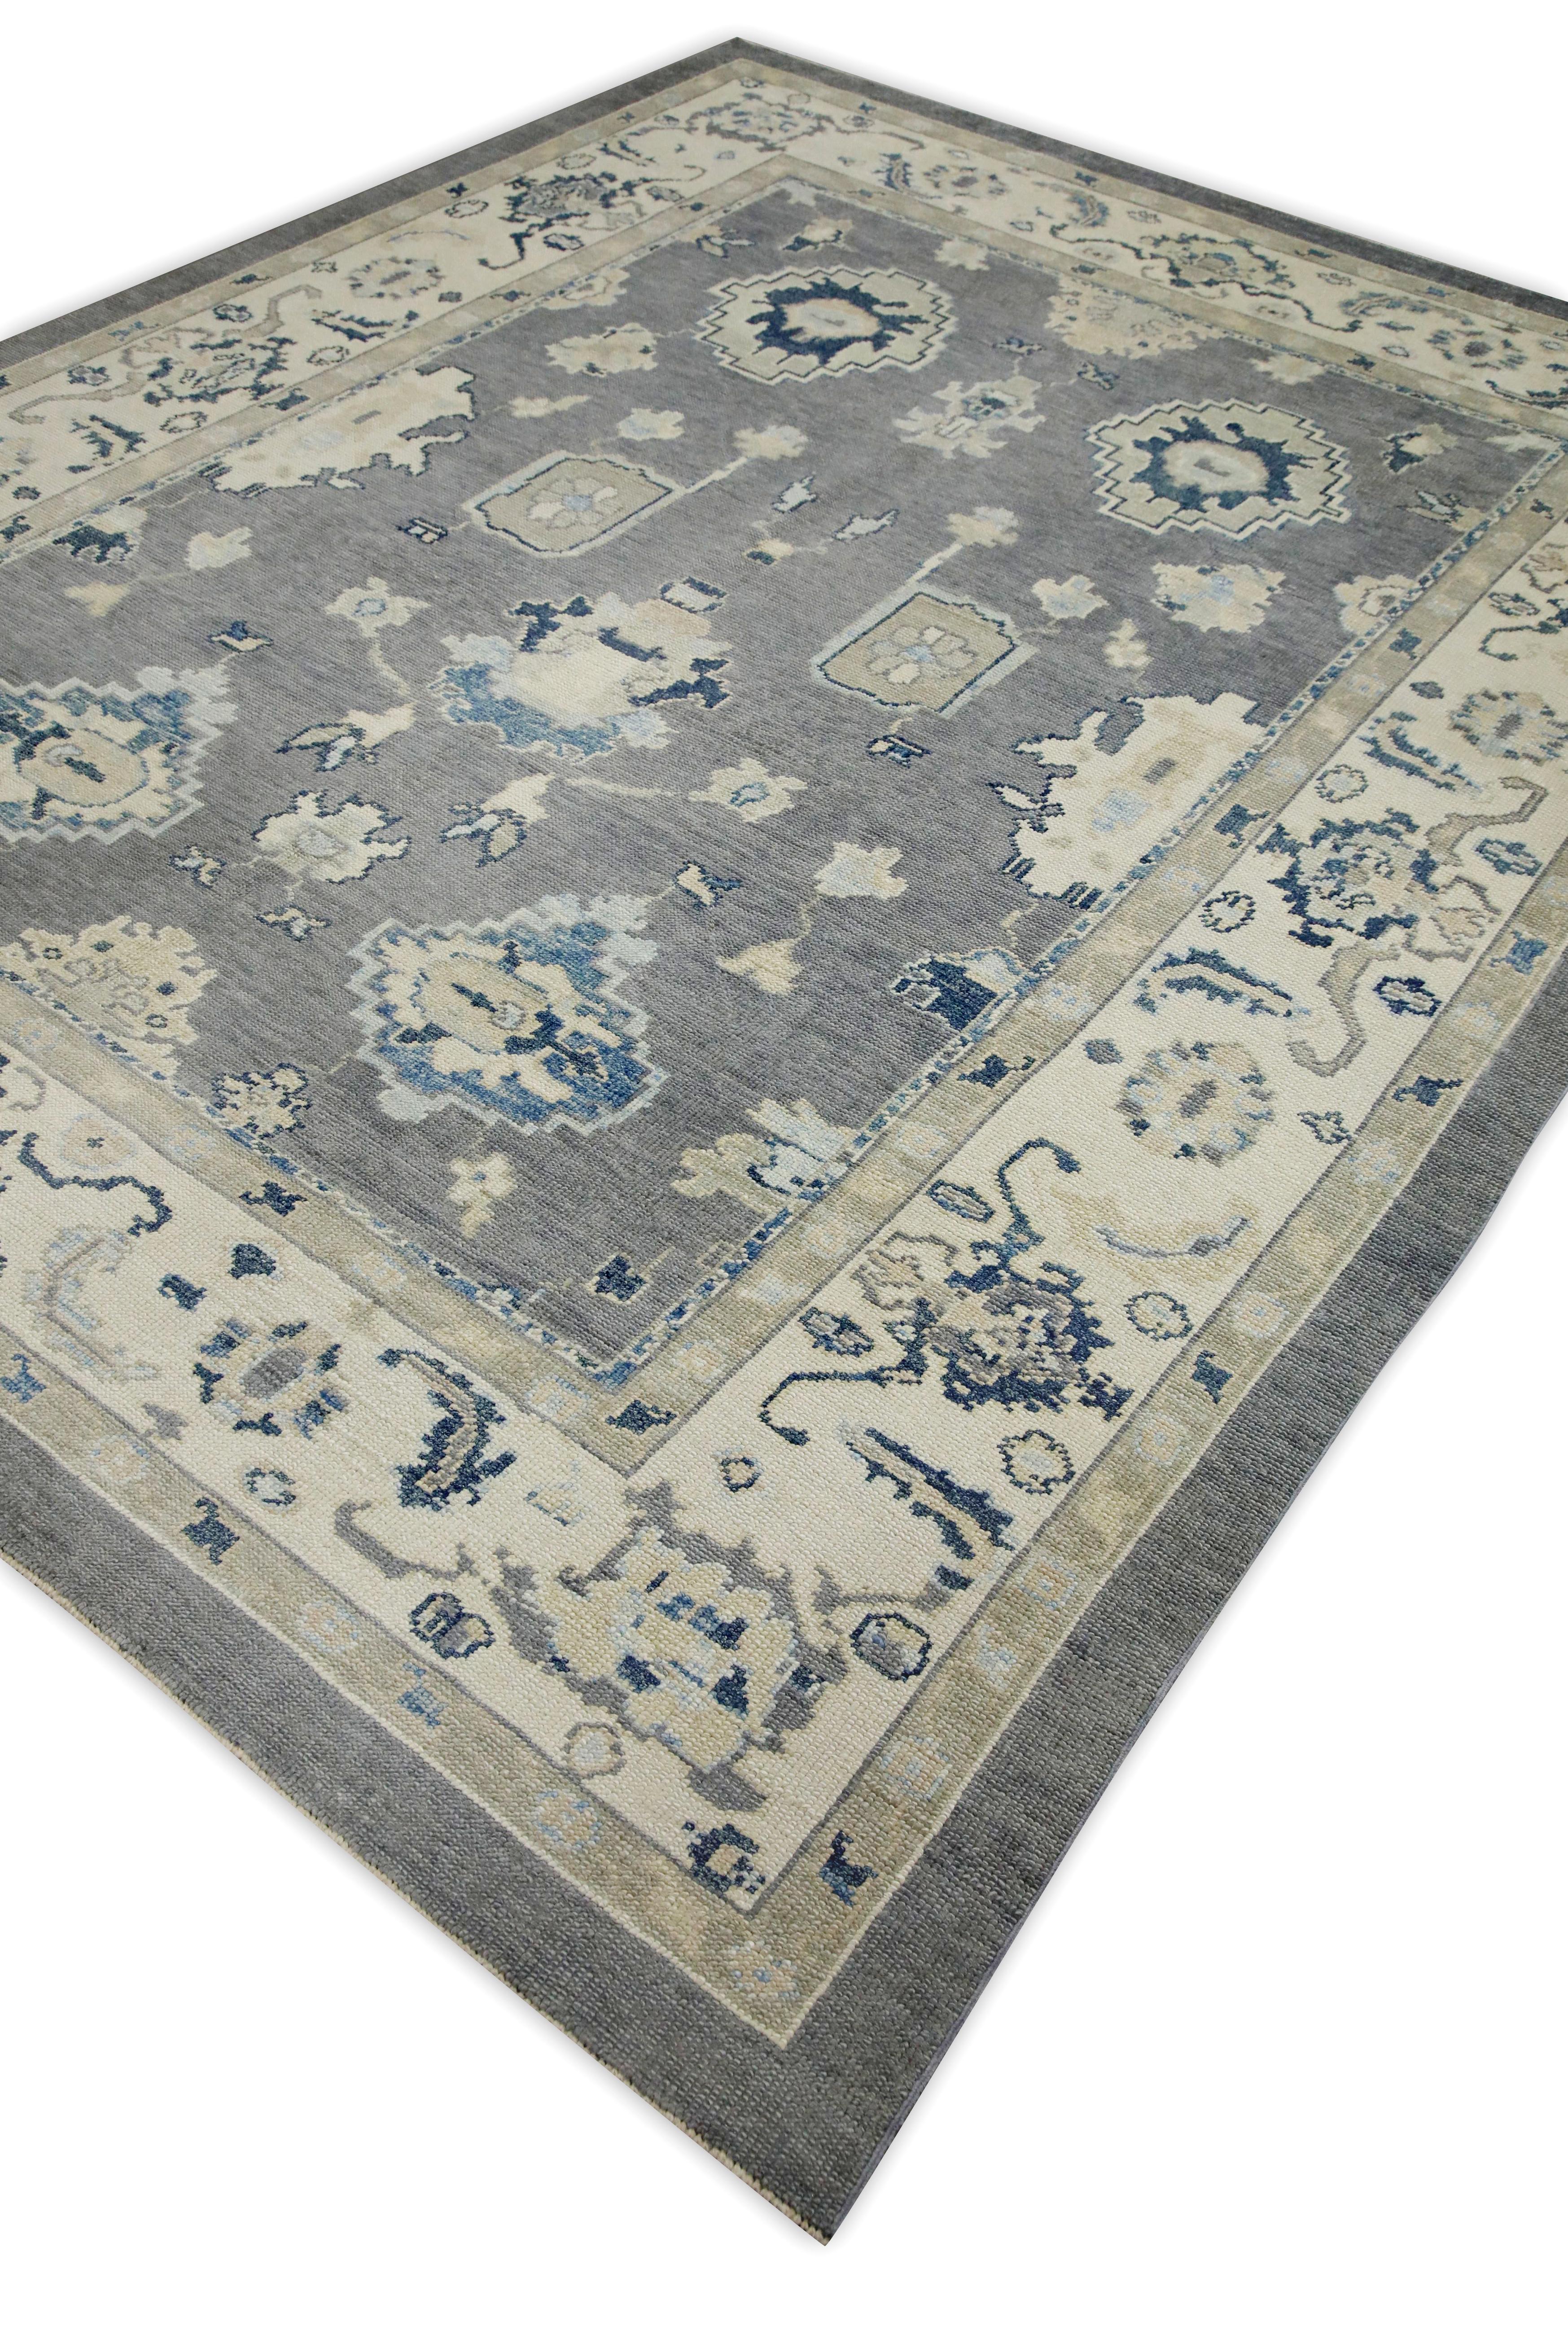 Contemporary Gray & Blue Floral Design Handwoven Wool Turkish Oushak Rug 8'3